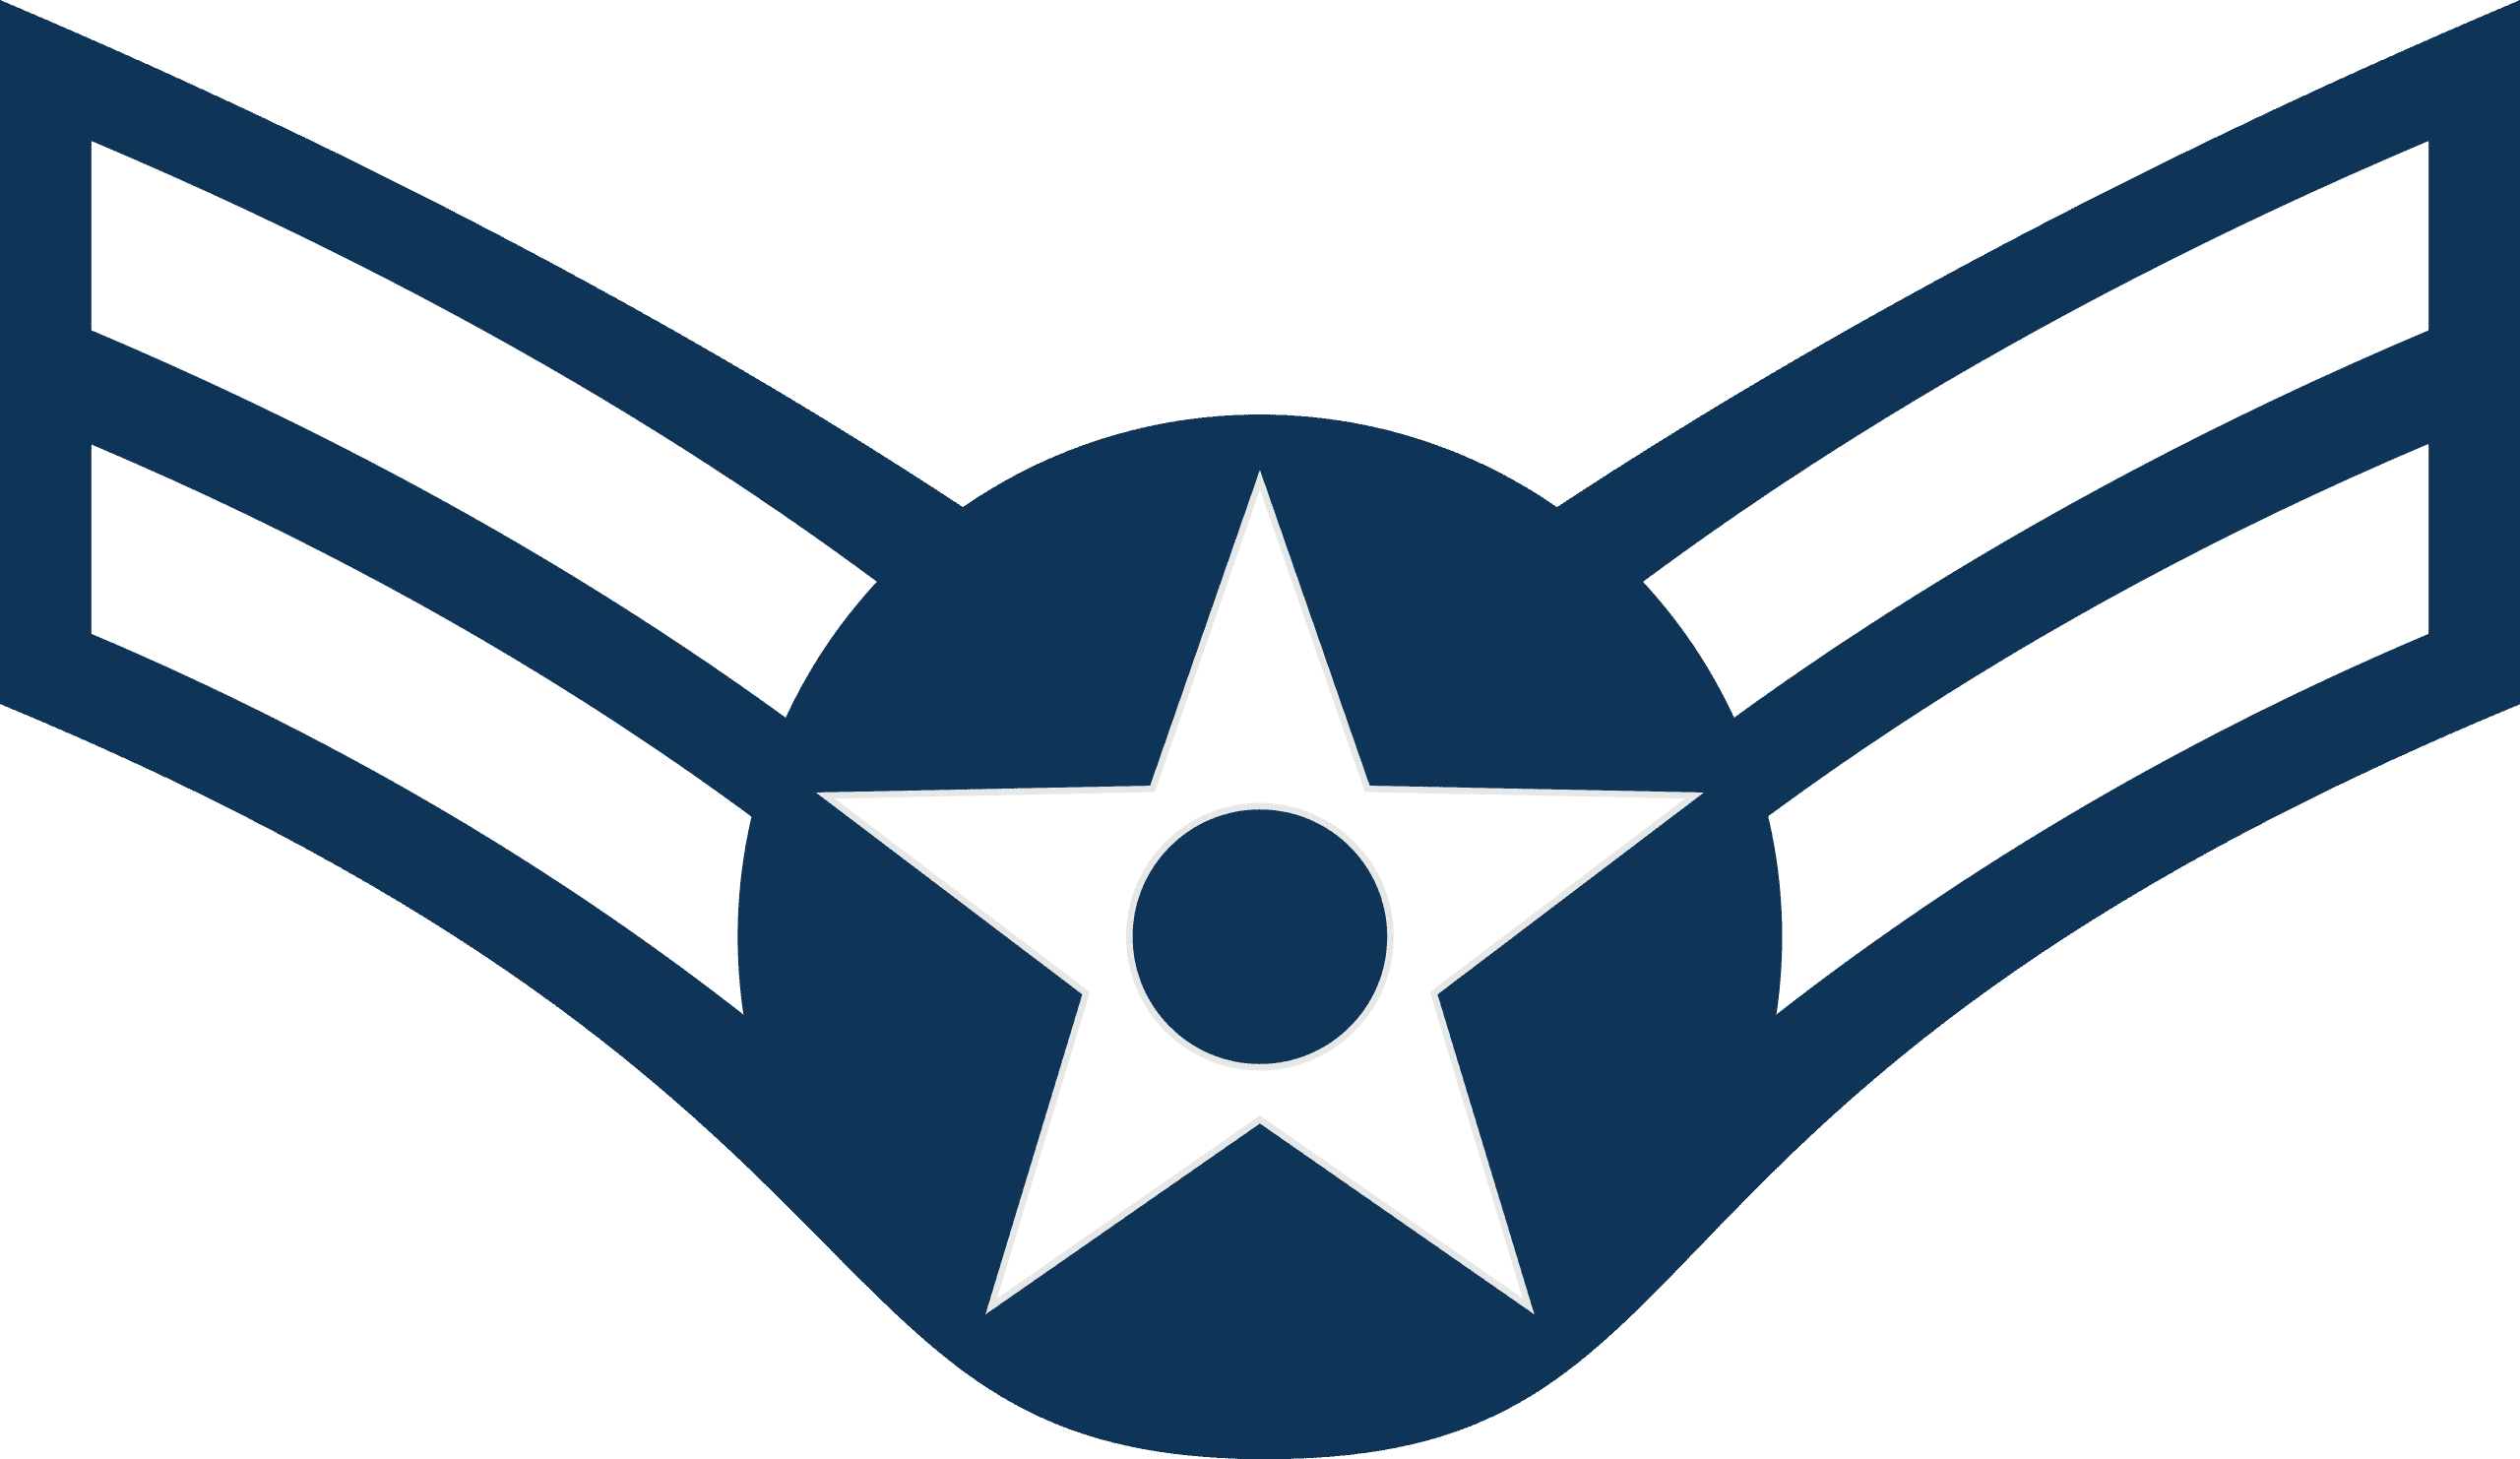 <p>An E-3 Airman First Class is already adjusted to Air Force life and can help younger enlisted airman make their life adjustments. In this rank, earnings range from $28,530 to $32,162 annually. </p><p><span>Would you please let us know what you think about our content? <p>Agree? Tell us by clicking the “Thumbs Up” button above.</p> Disagree? Leave a comment telling us what you’d change.</span></p>